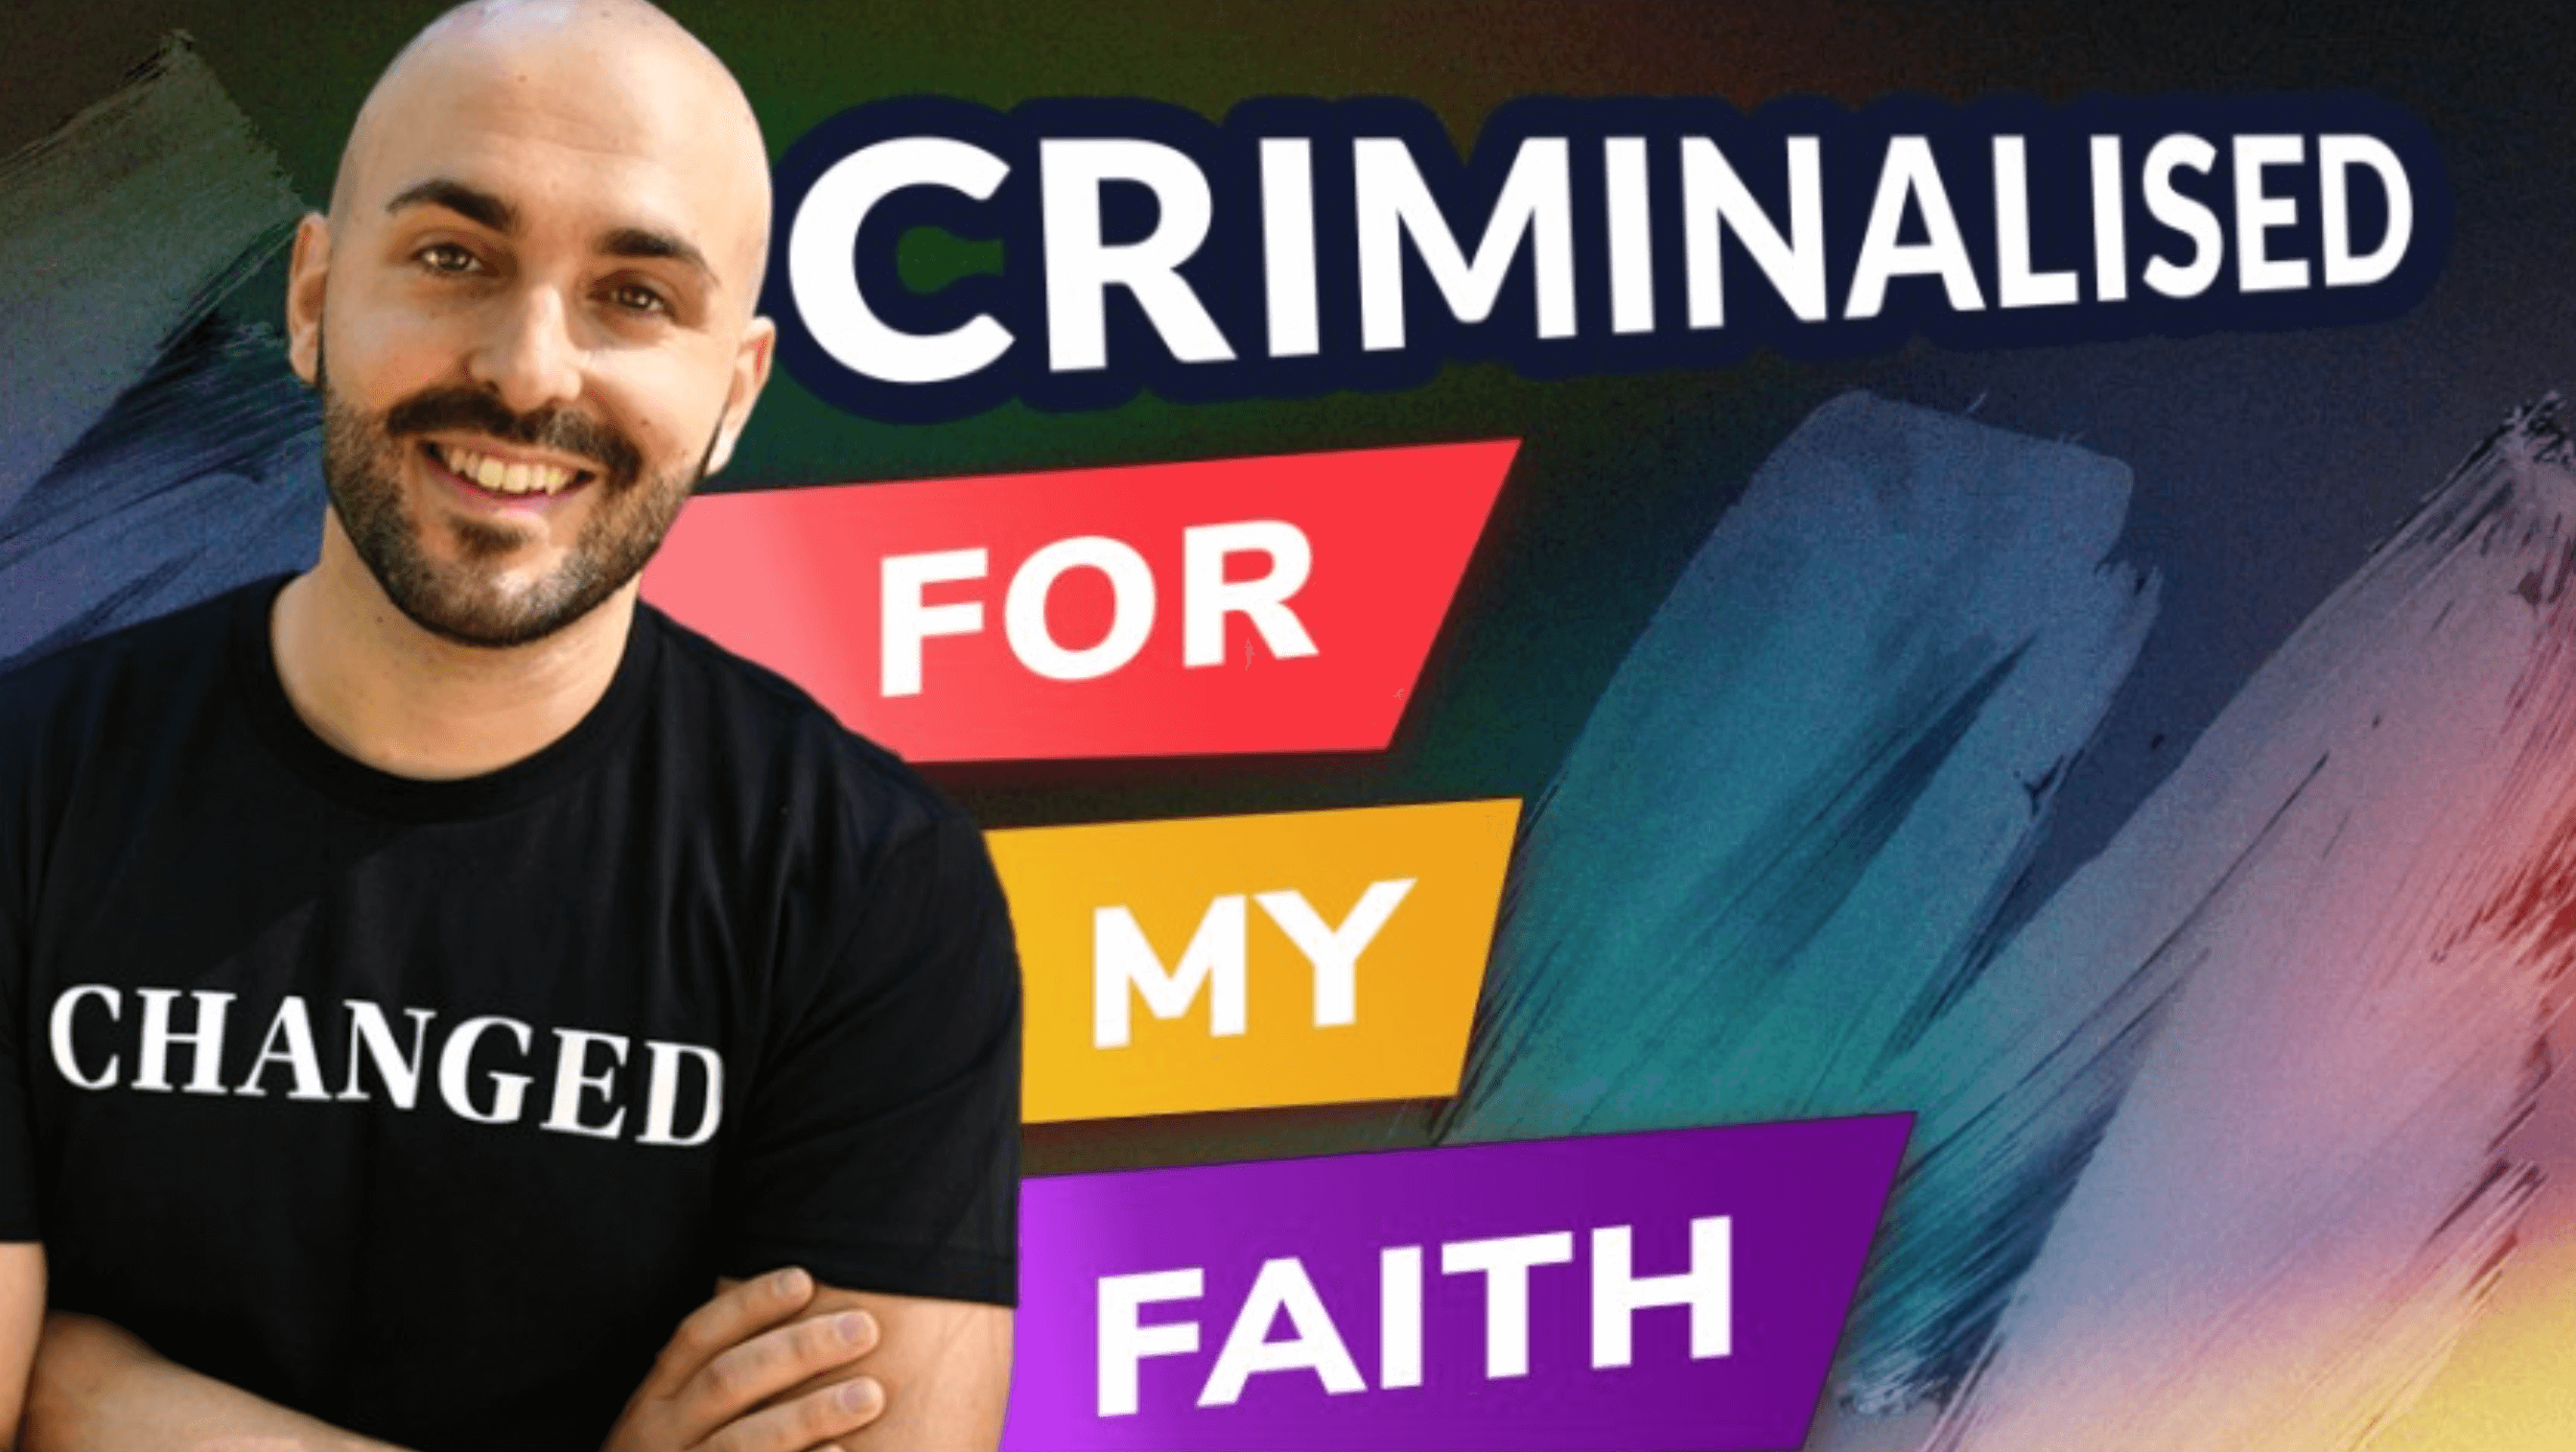 Matthew Grech facing criminal charges for sharing his ex-LGBT story